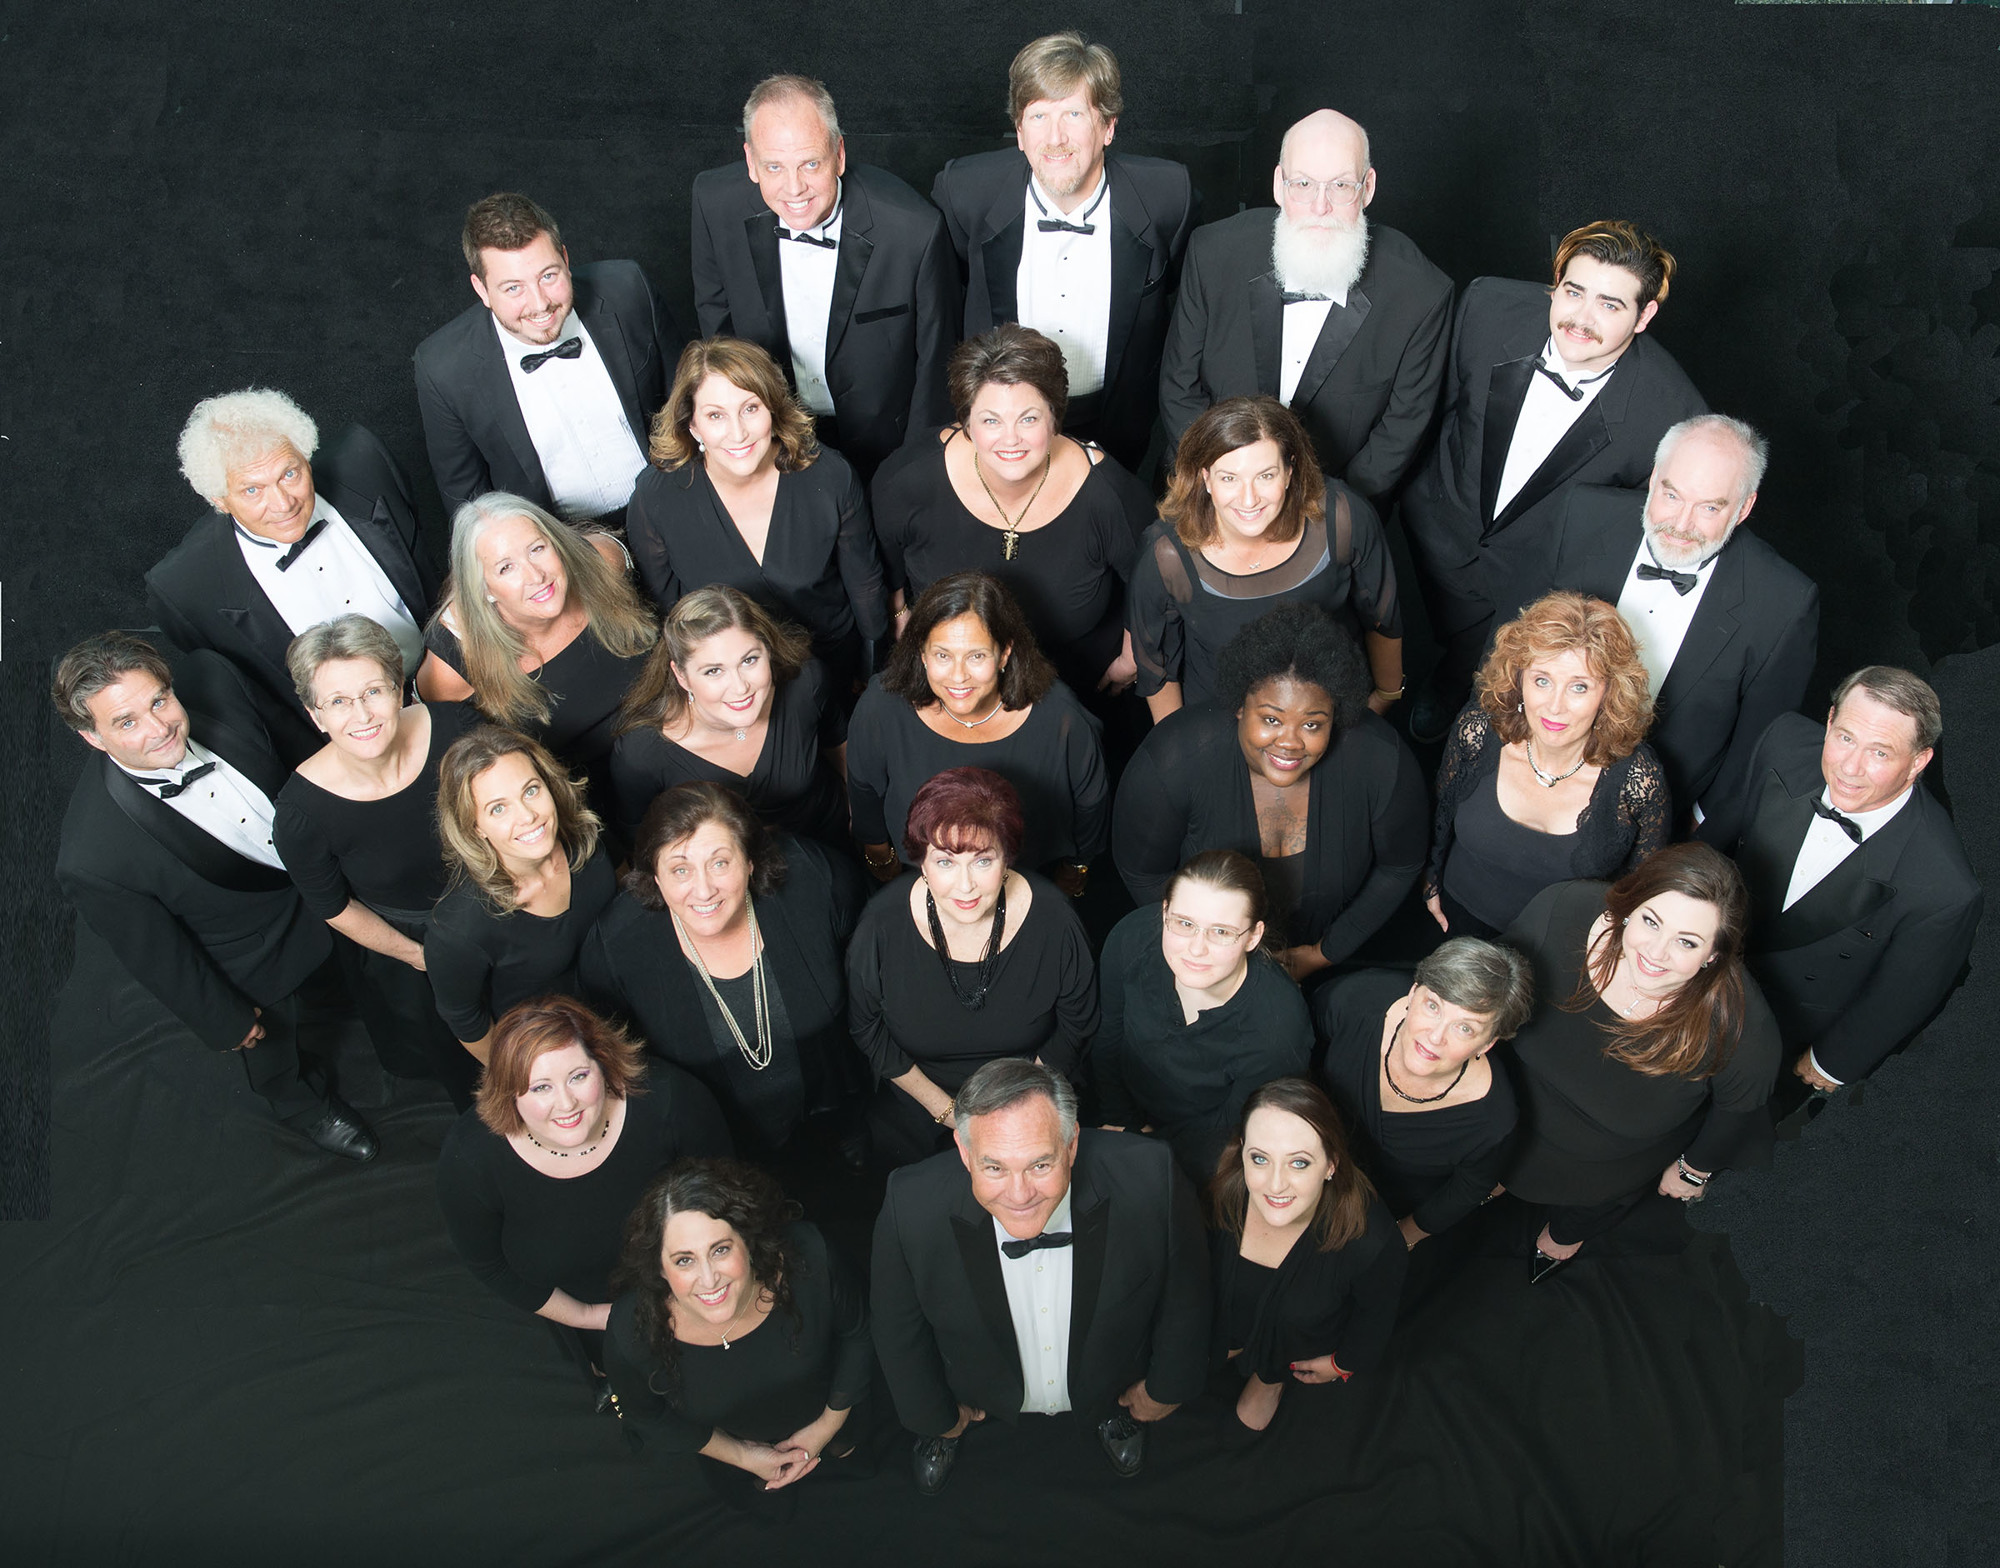 The Choral Artists are up for expressing Grant's journey through the cosmos. (Courtesy photo)